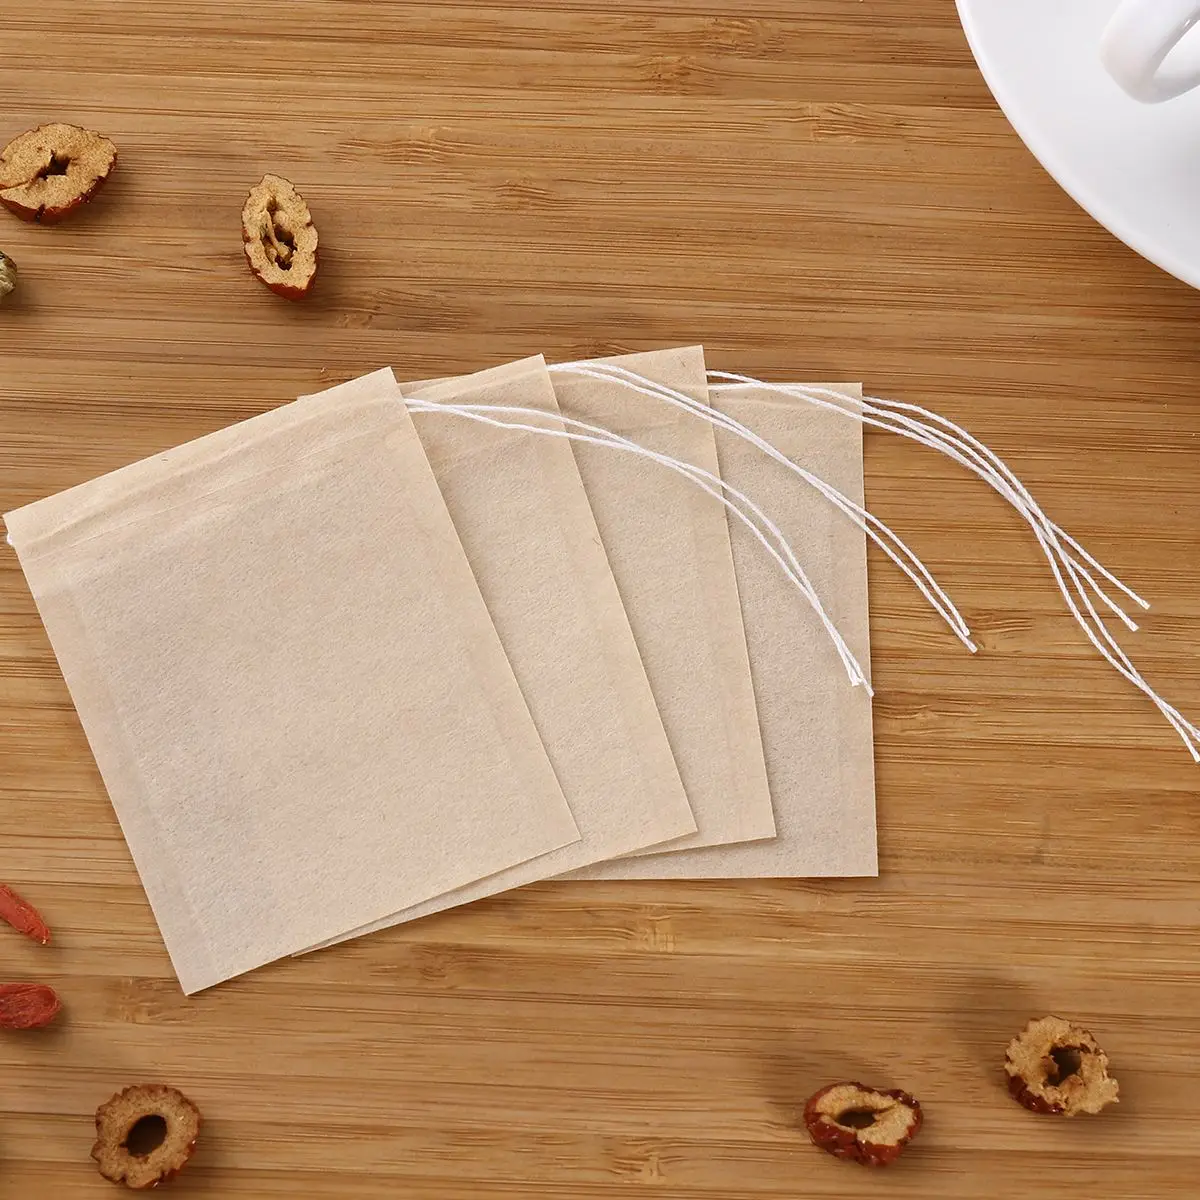 200pcs Non-Woven Fabrics Teabags Drawstring Tea Bag Filter Paper Empty Tea Pouch Bags for Loose Leaf Tea Powder Herbs Wholeasle